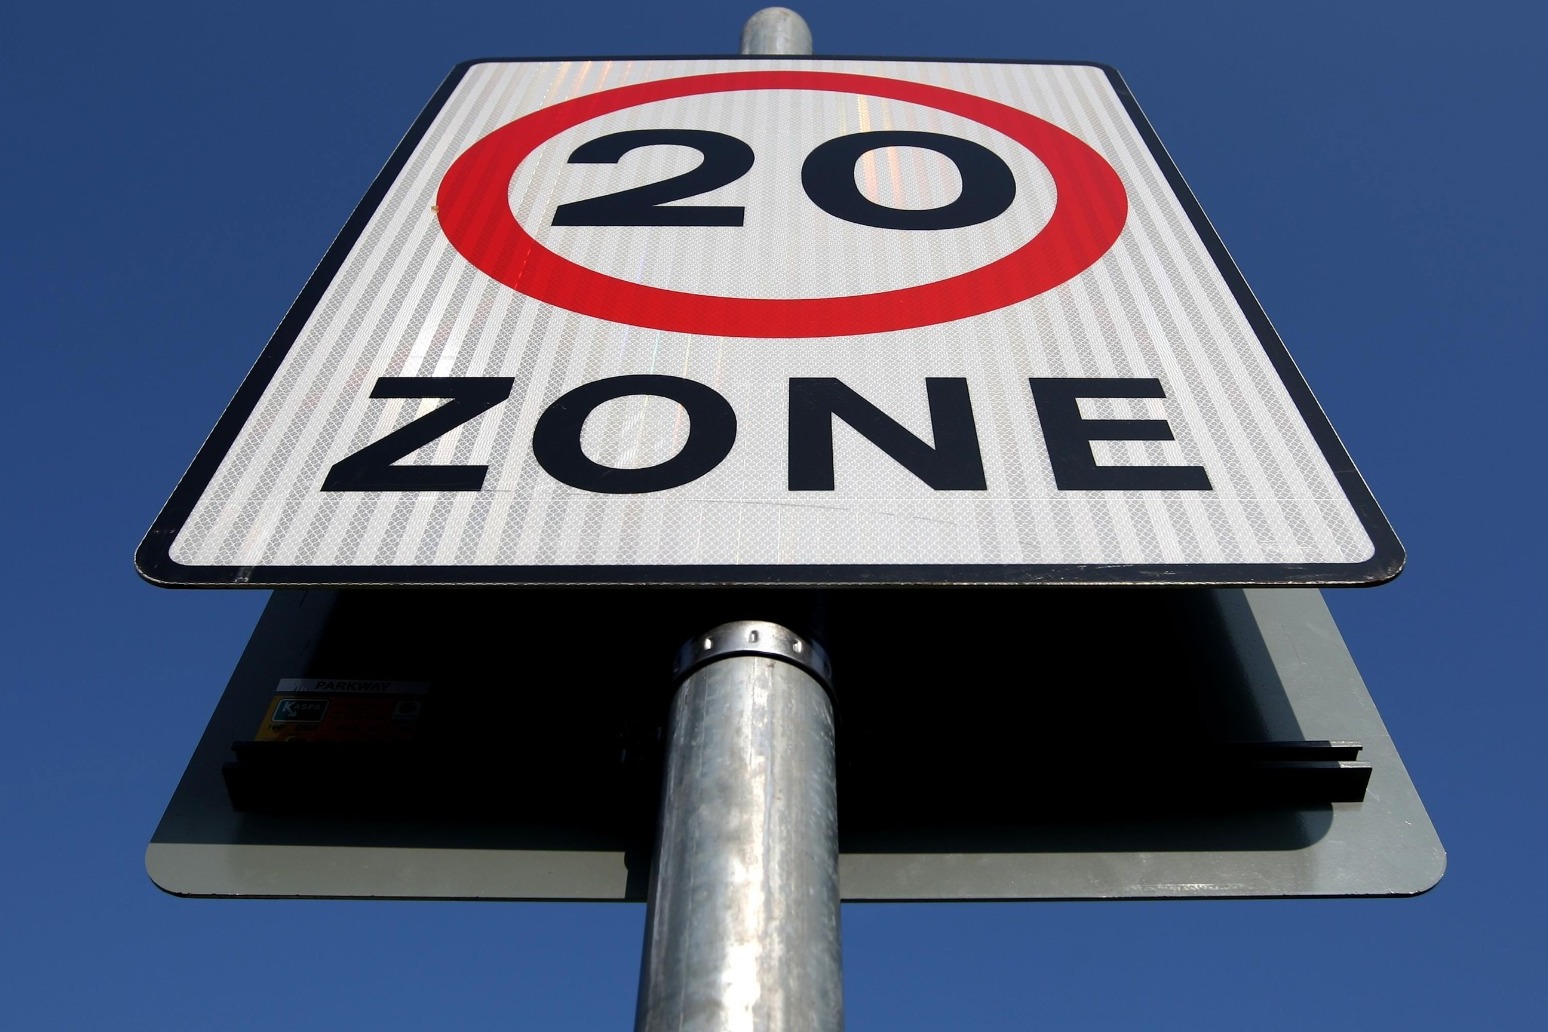 Welsh Government to correct 20mph speed limit guidance says transport minister